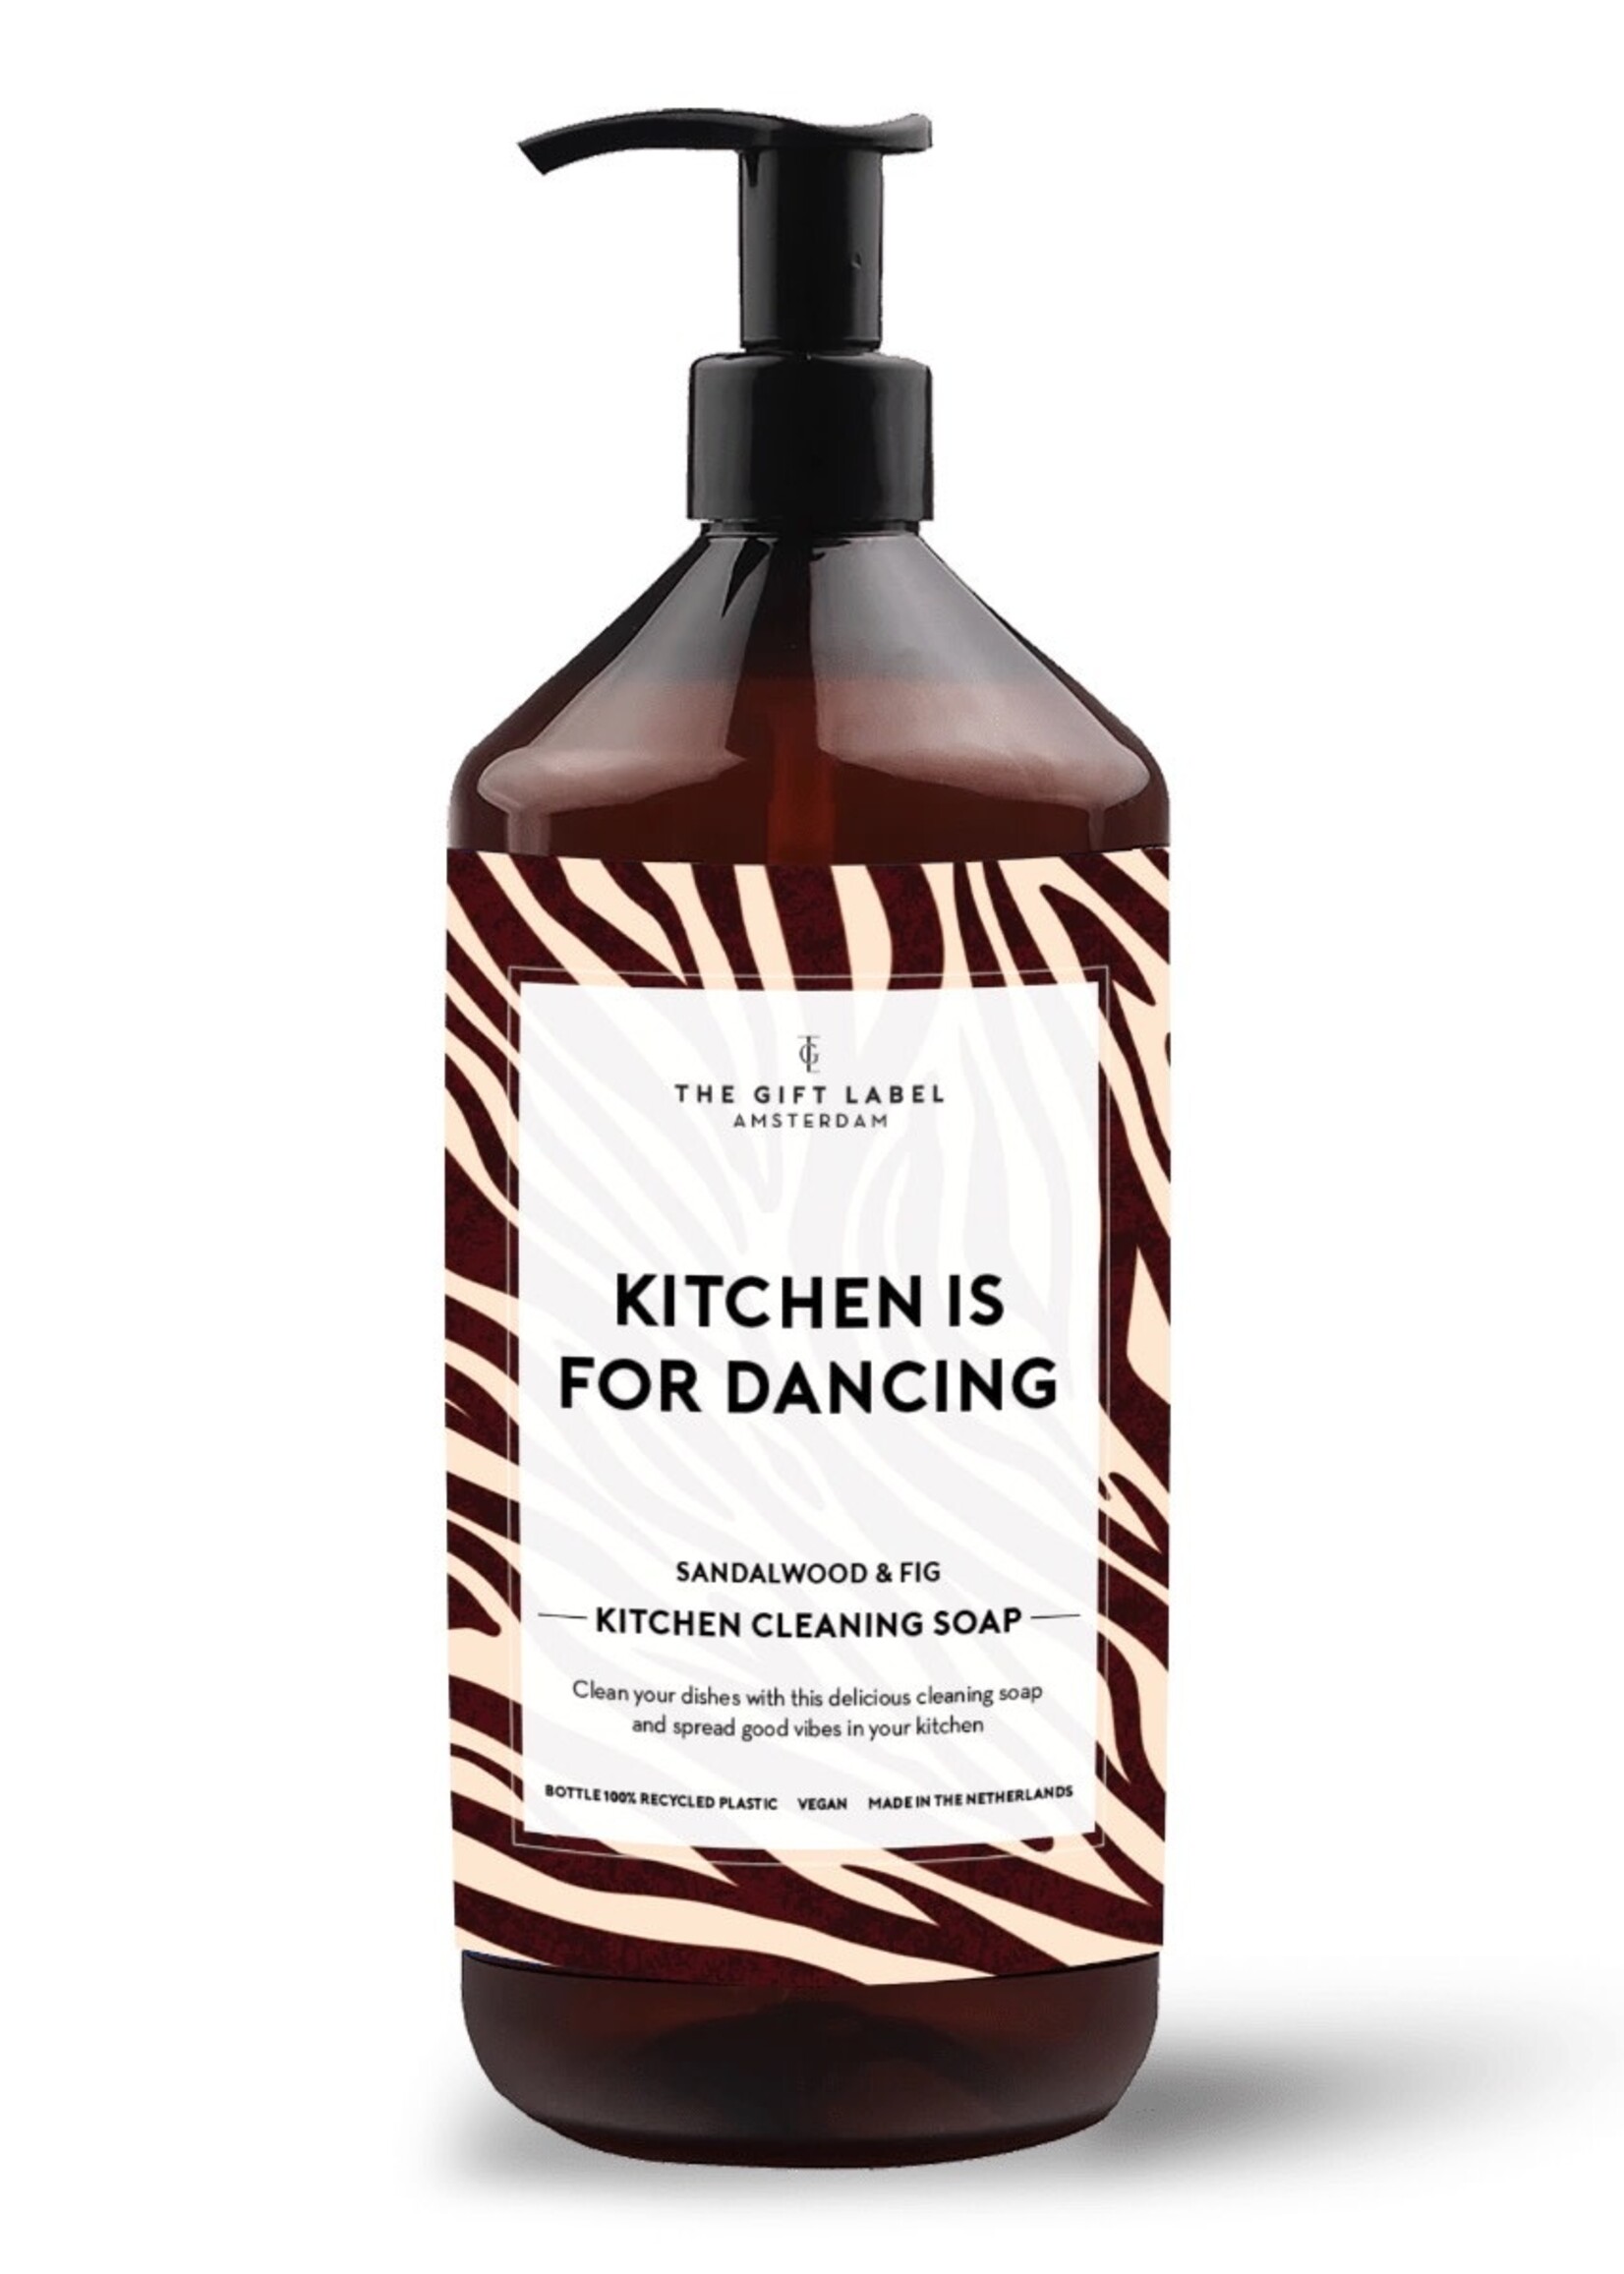 The Gift Label The Gift Label Kitchen Cleaning Soap 1000ml Kitchen is for dancing